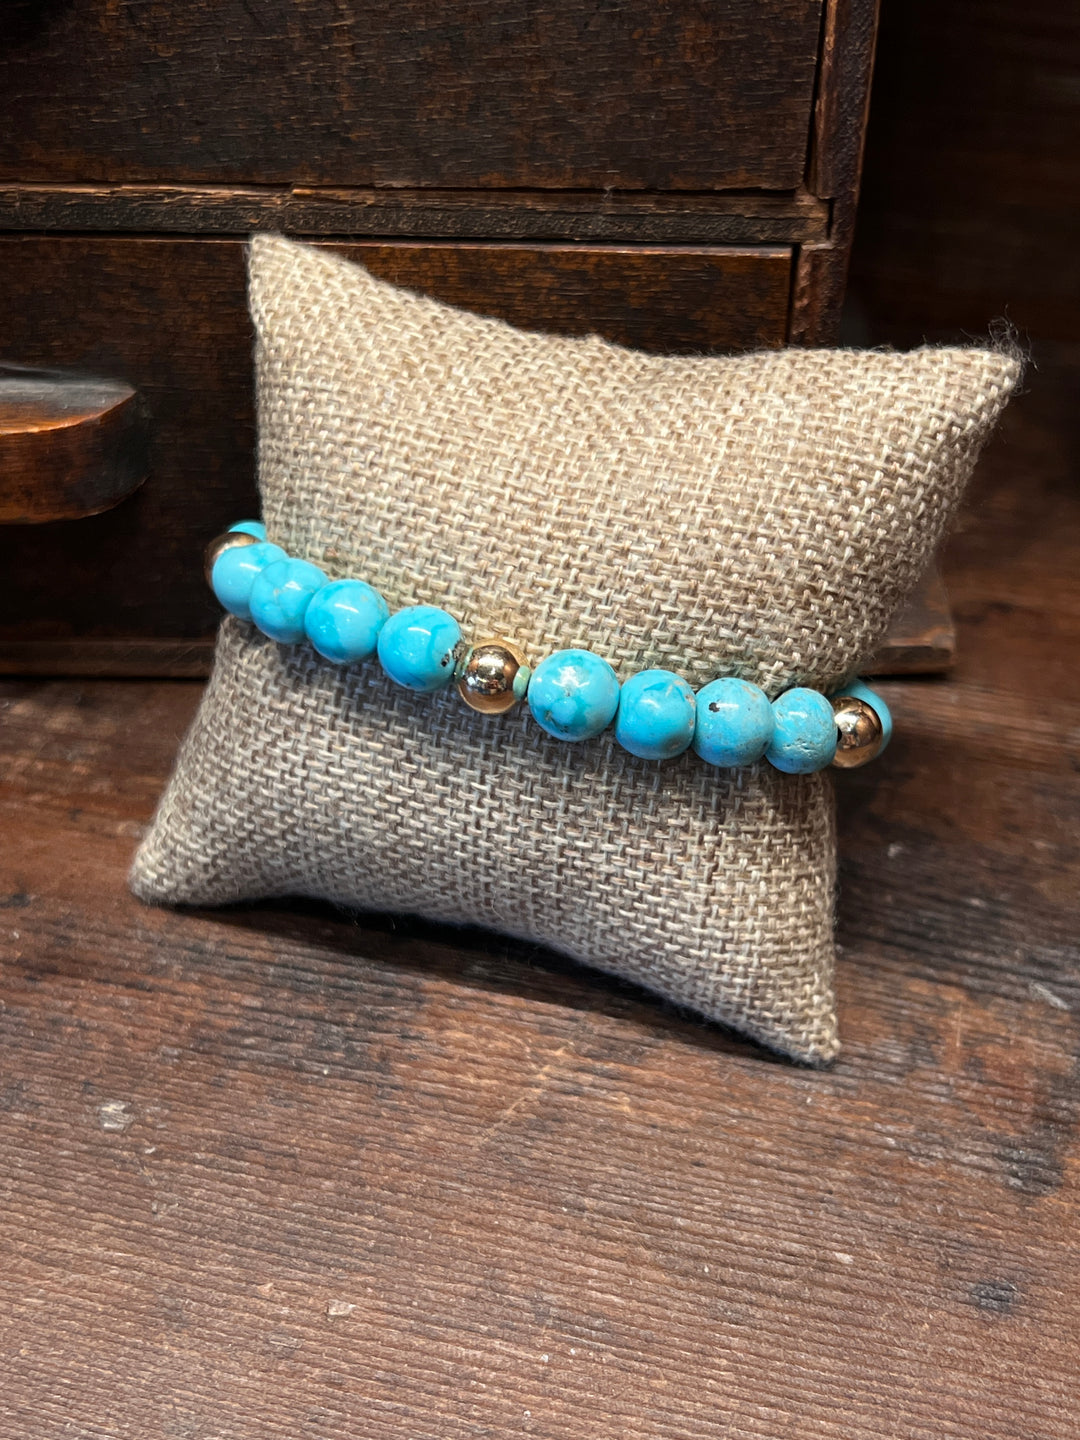 14K 8mm Gold Beads and Sleeping Beauty Turquoise Bracelet